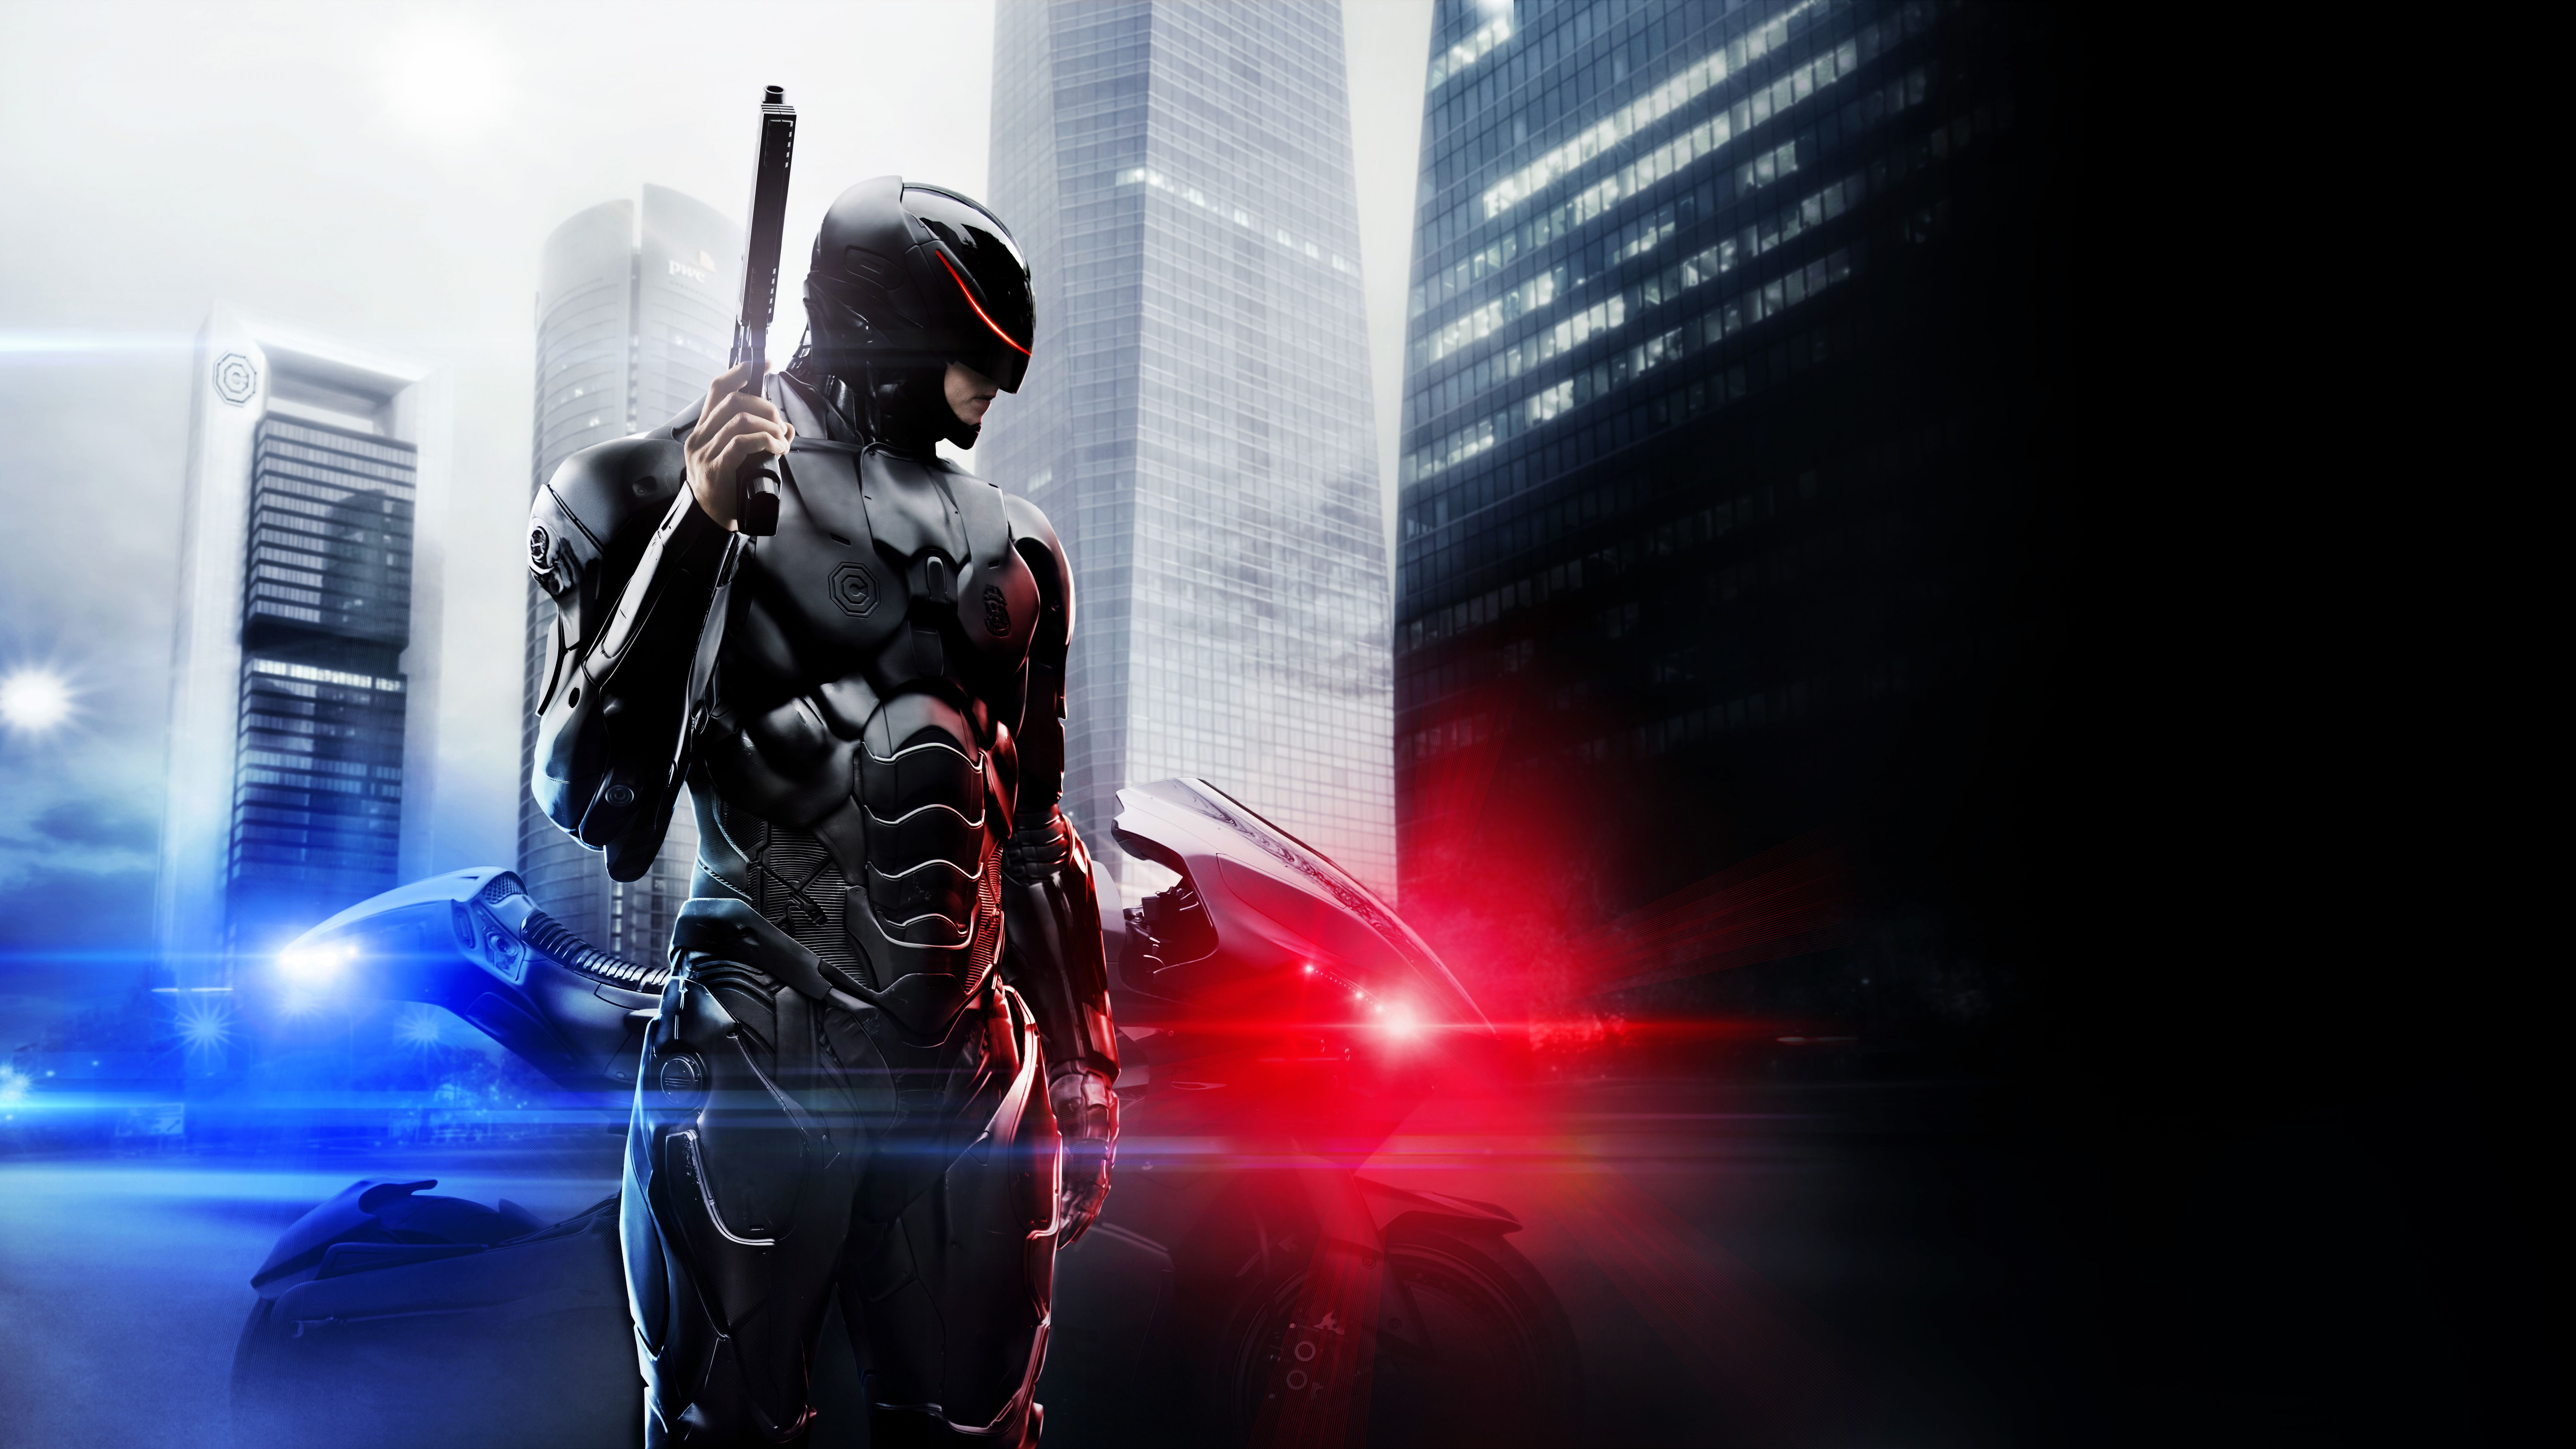 Man in Black and Red Suit Holding Black Rifle. Wallpaper in 7680x4320 Resolution